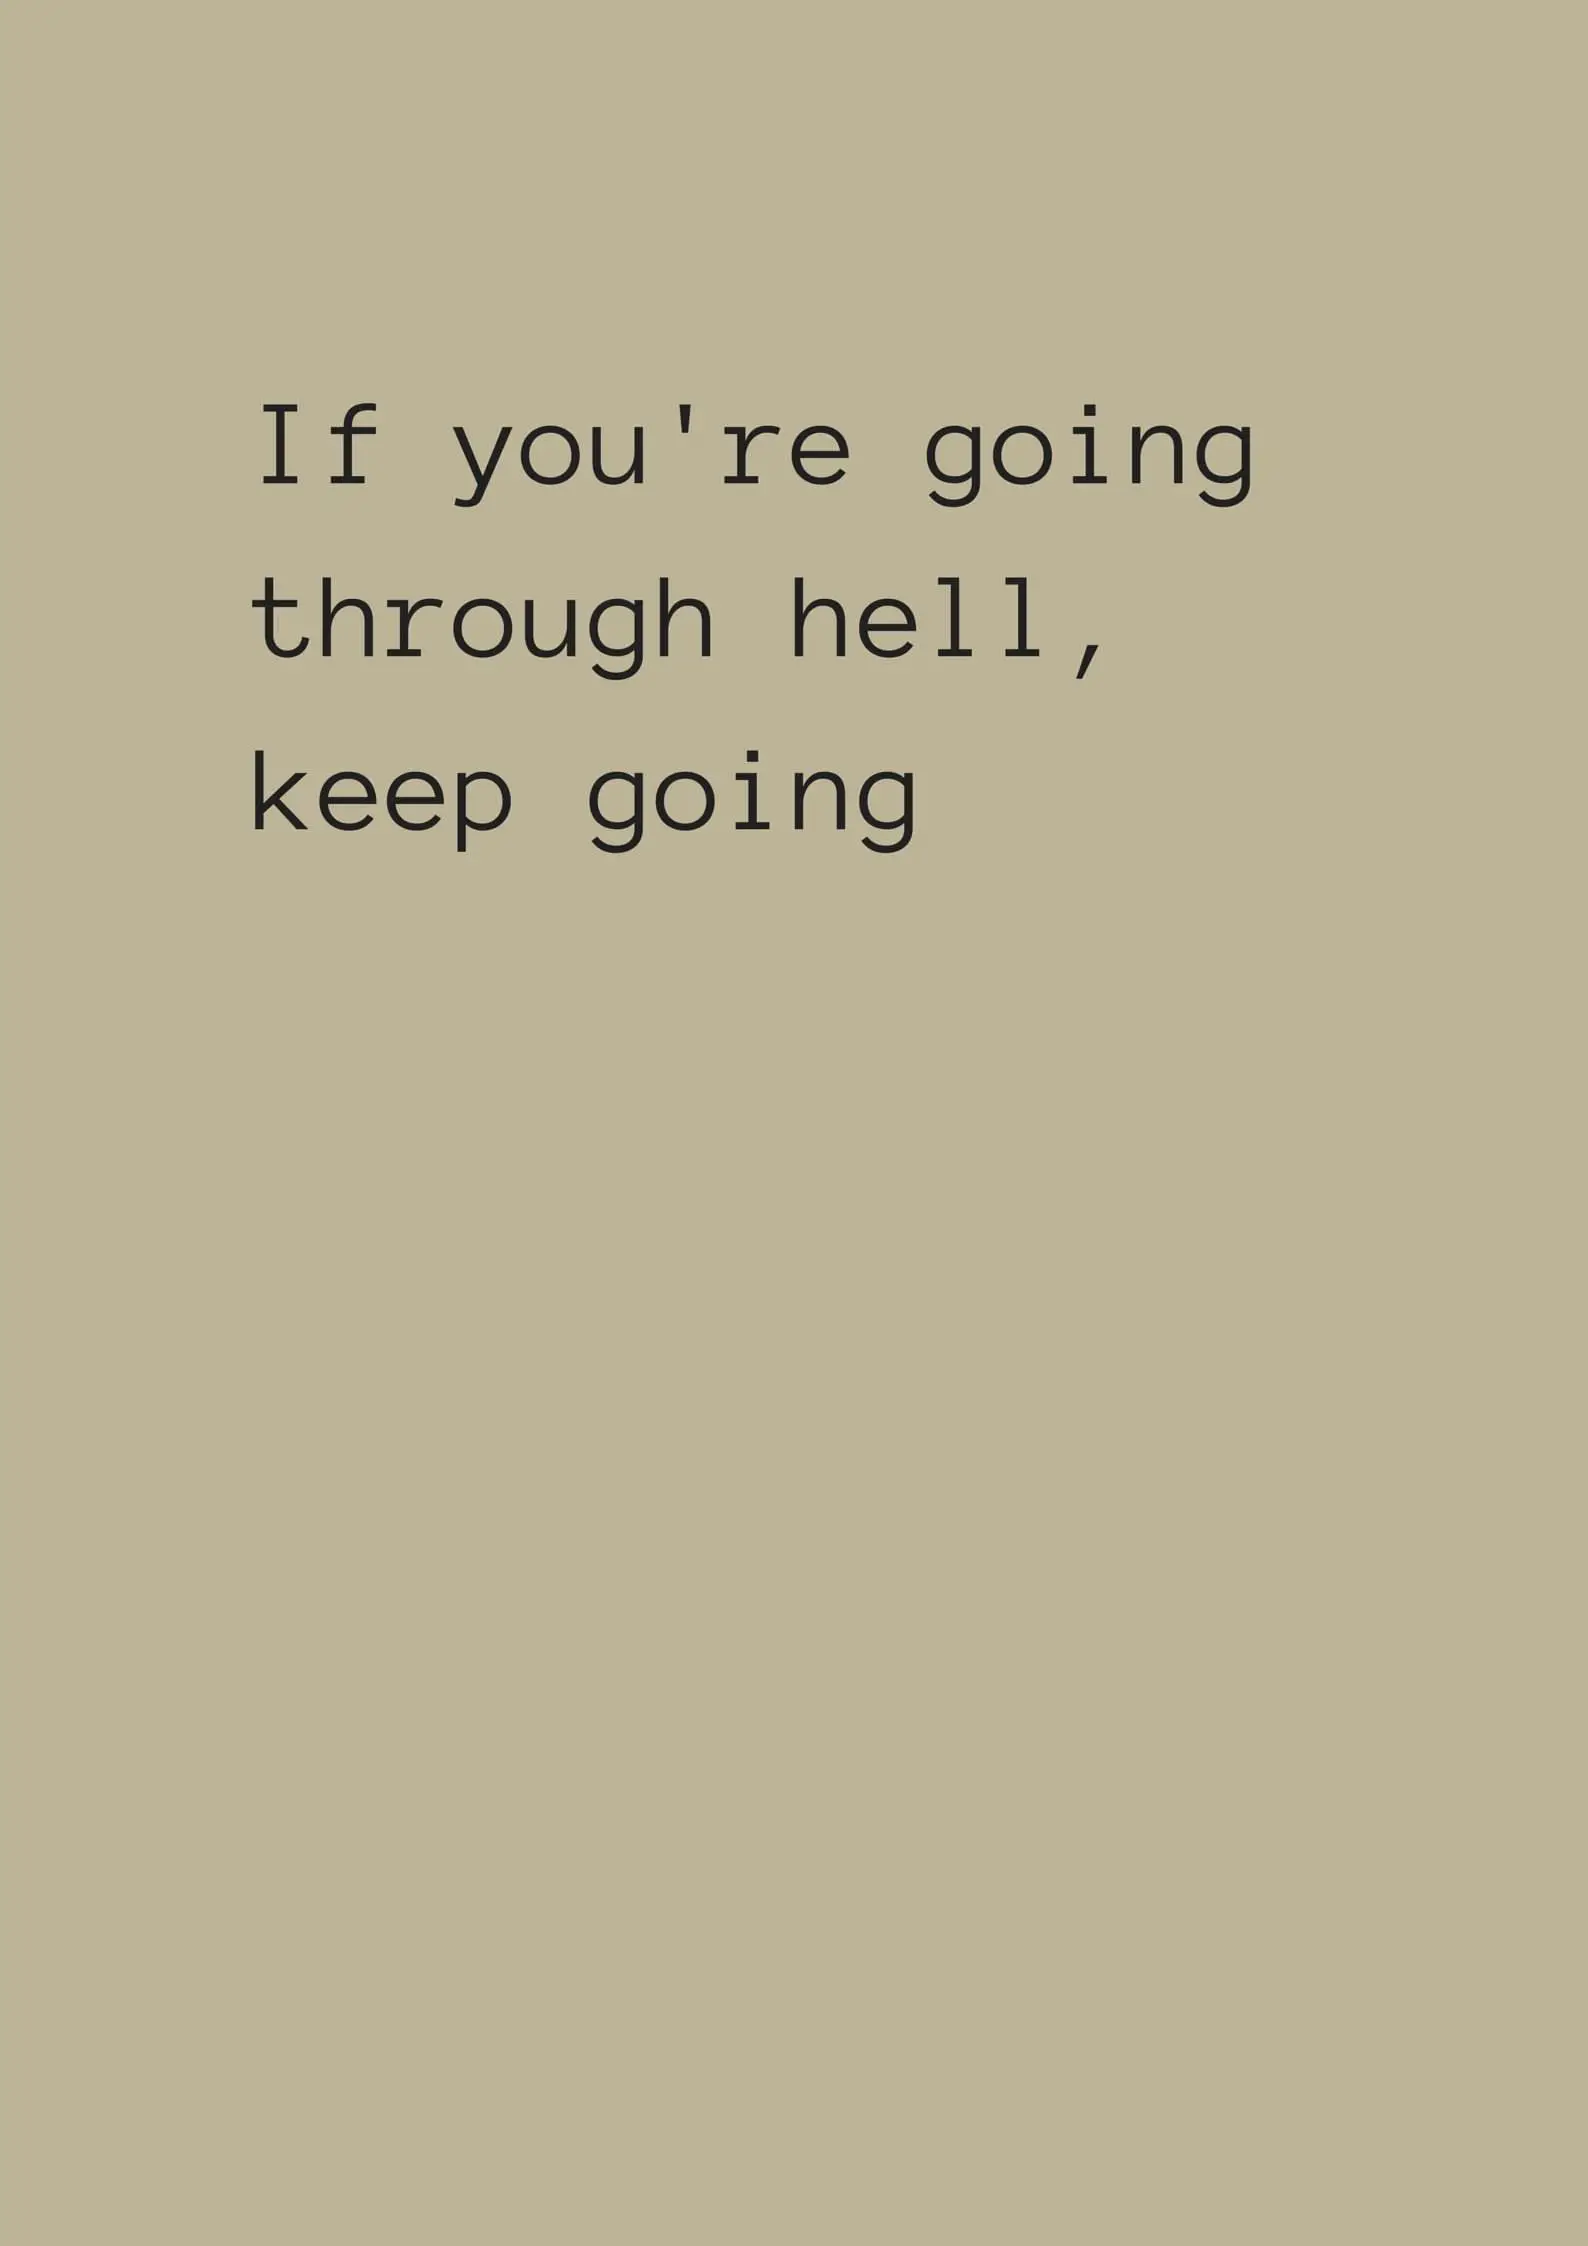 If youre going through hell keep going. Life and leadership quote